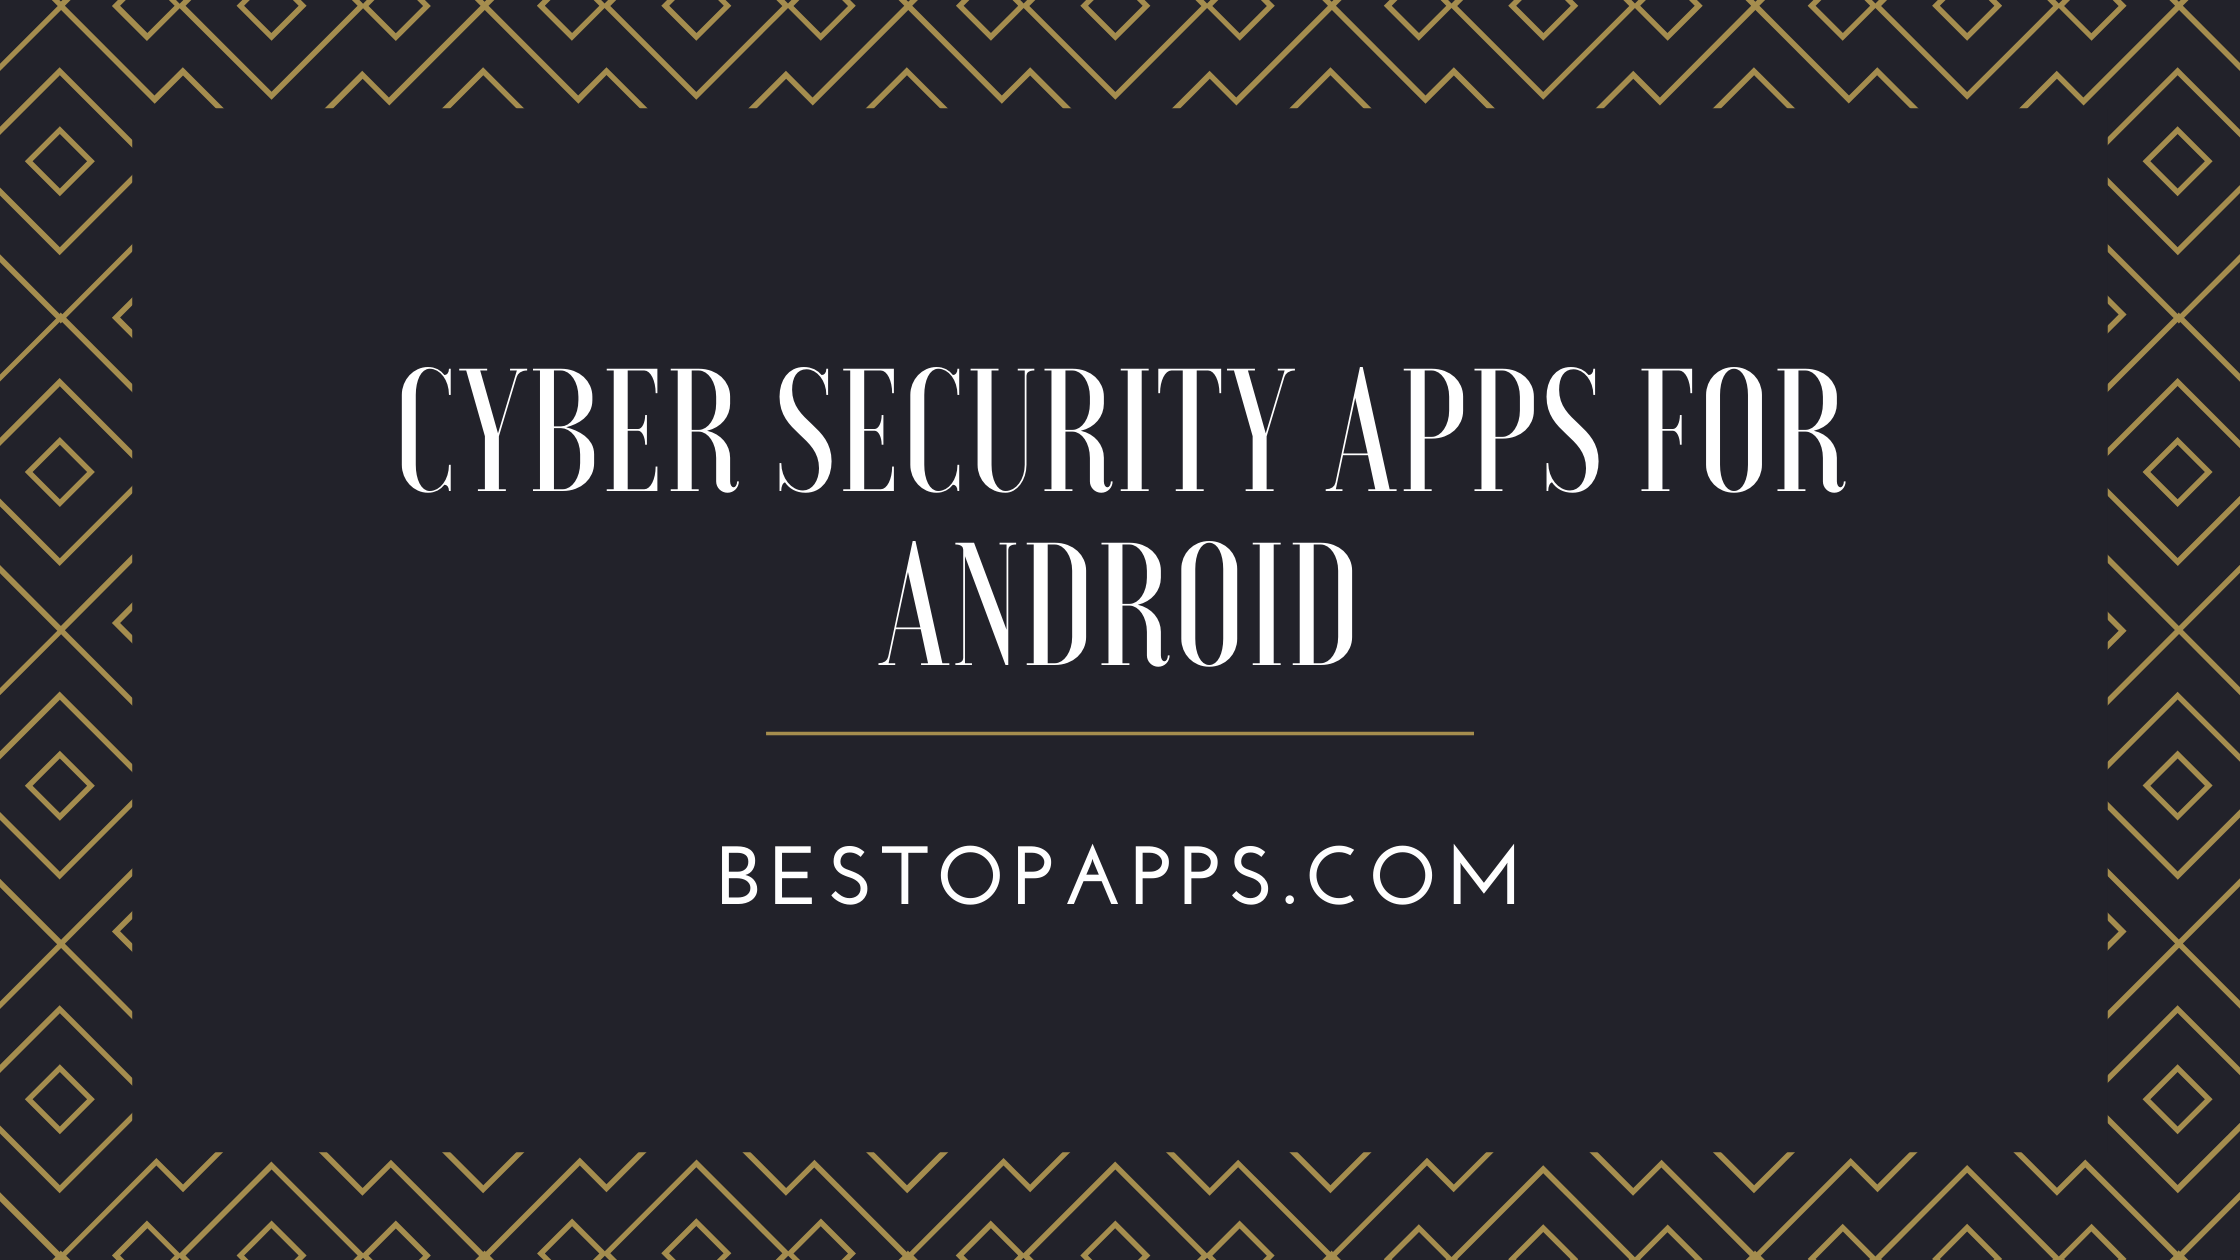 Cyber Security Apps for Android